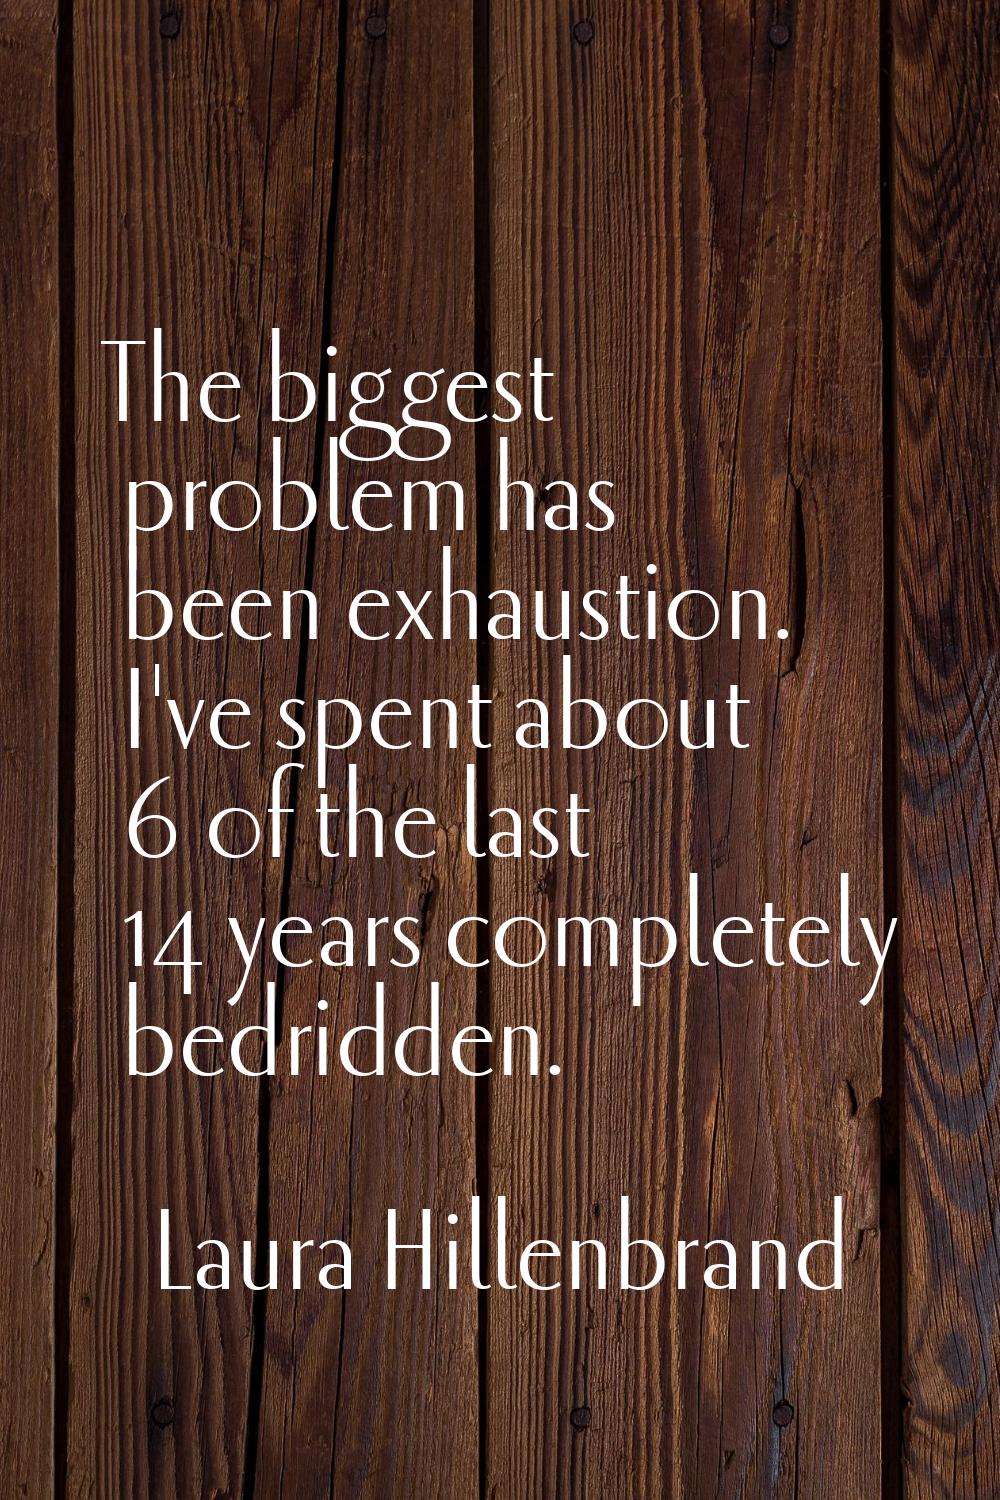 The biggest problem has been exhaustion. I've spent about 6 of the last 14 years completely bedridd